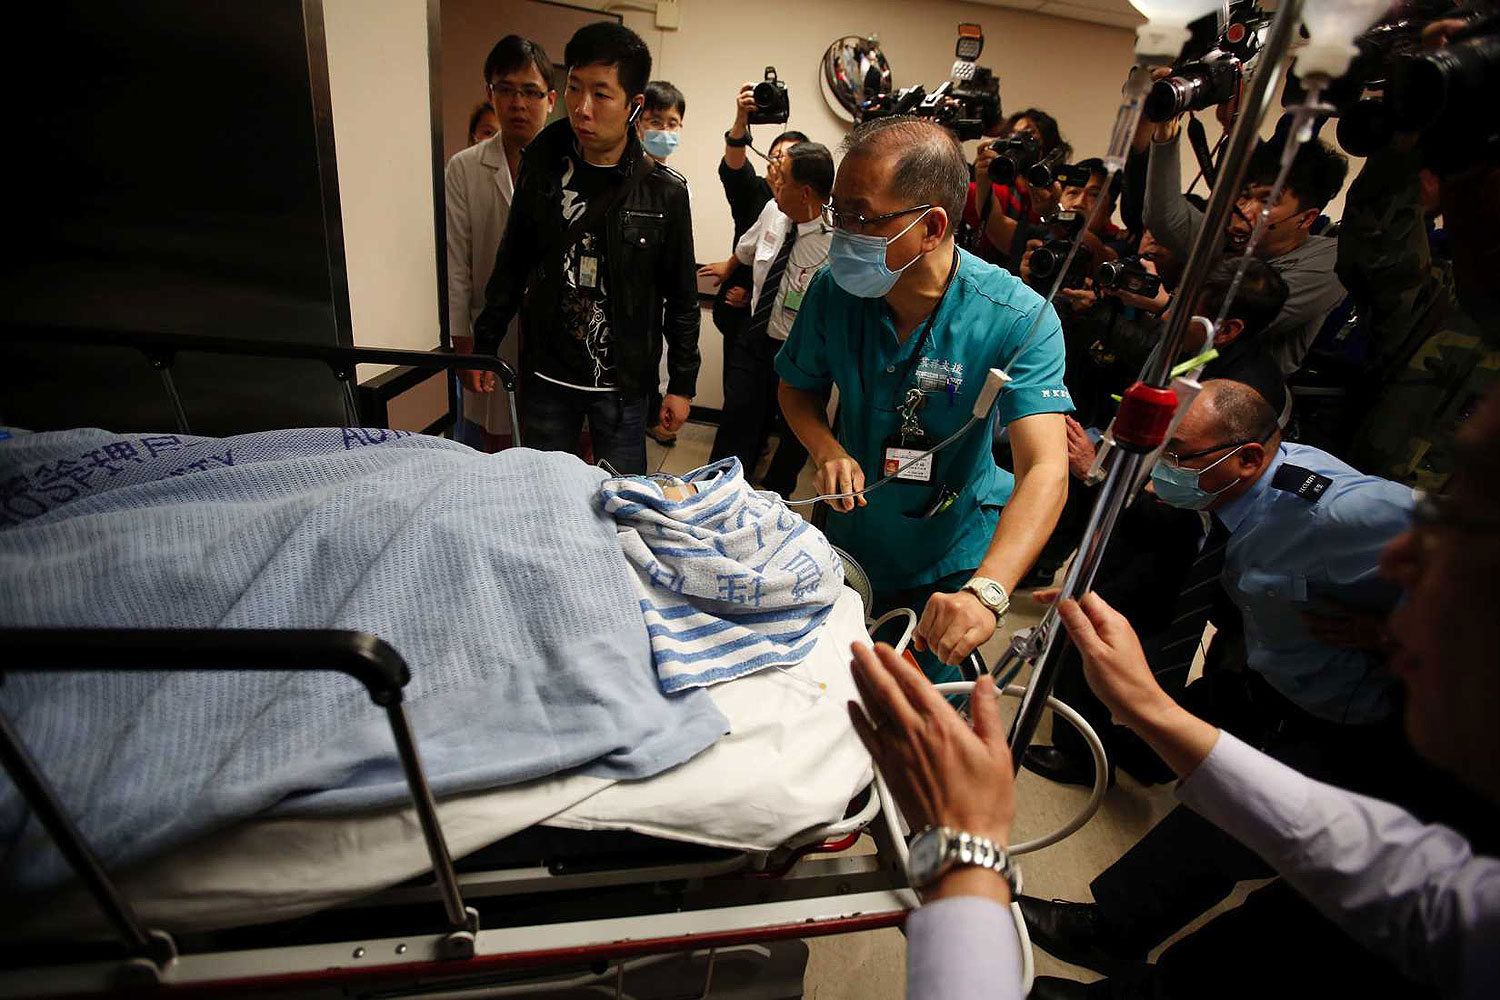 Former Ming Pao chief editor Kevin Lau Chun-to is wheeled into the operation theatre at a hospital in Hong Kong Feb. 26, 2014 (Reuters)